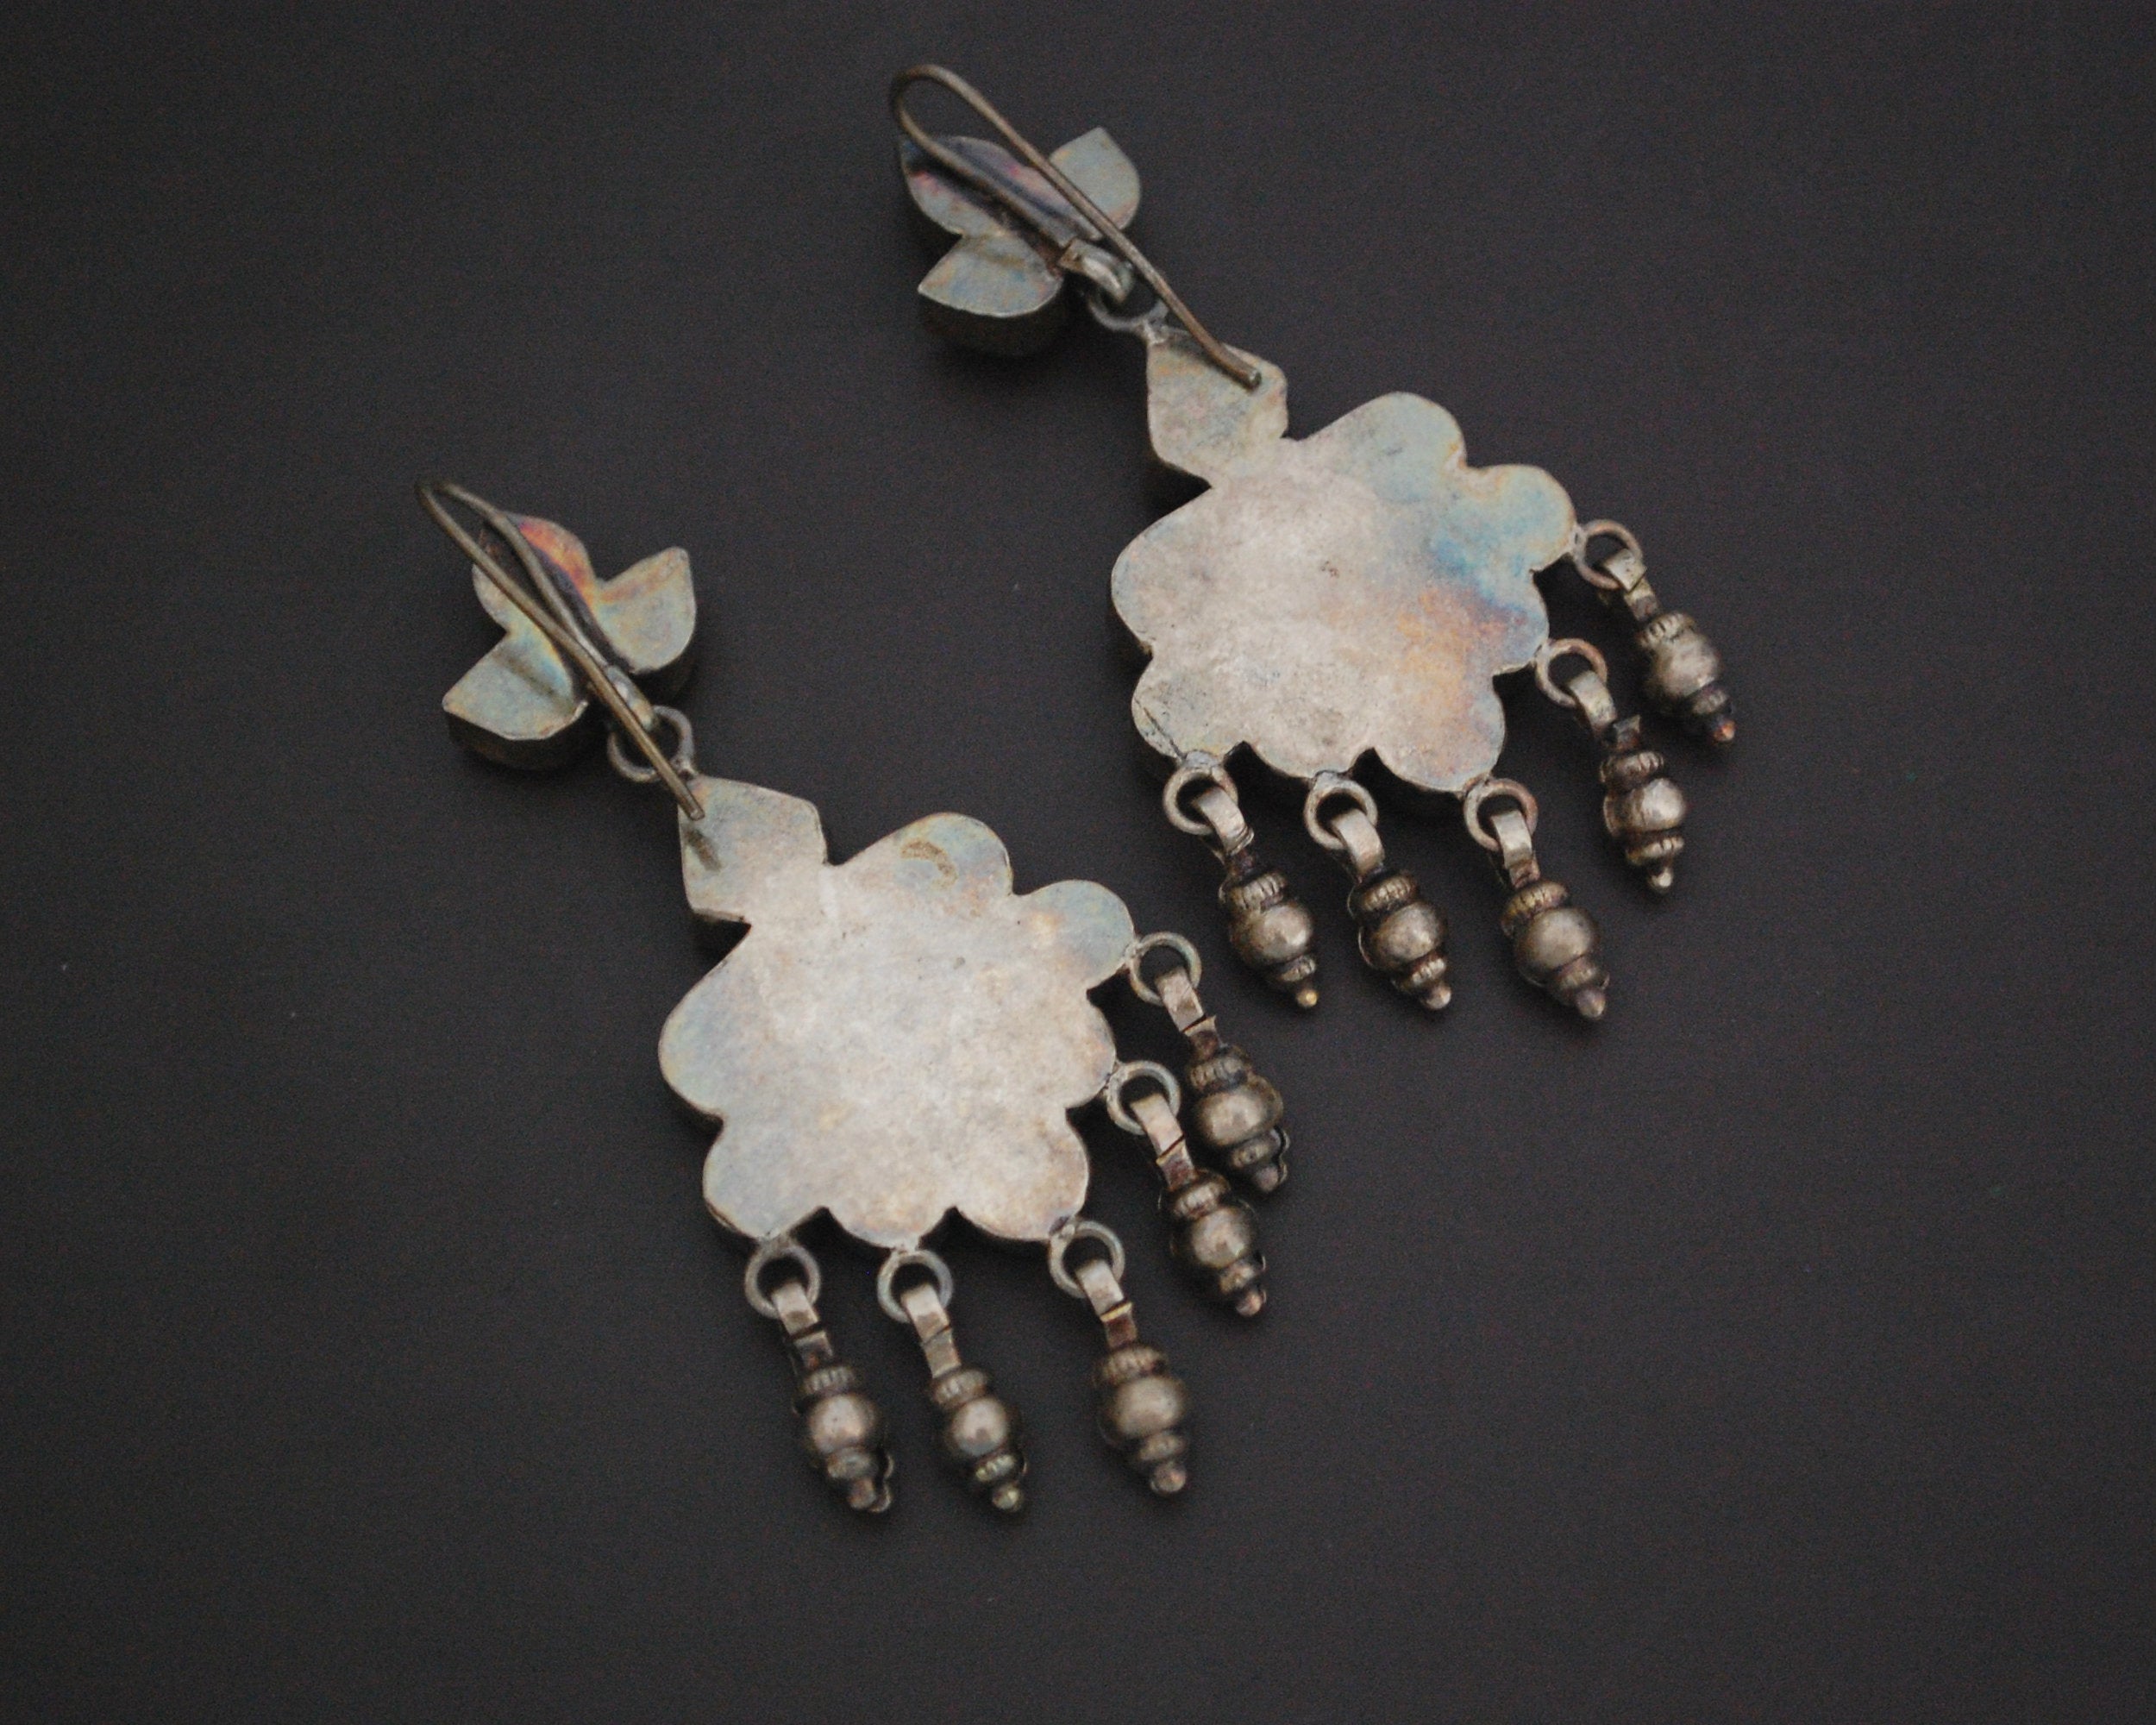 Rajasthani Earrings with Glass Inserts